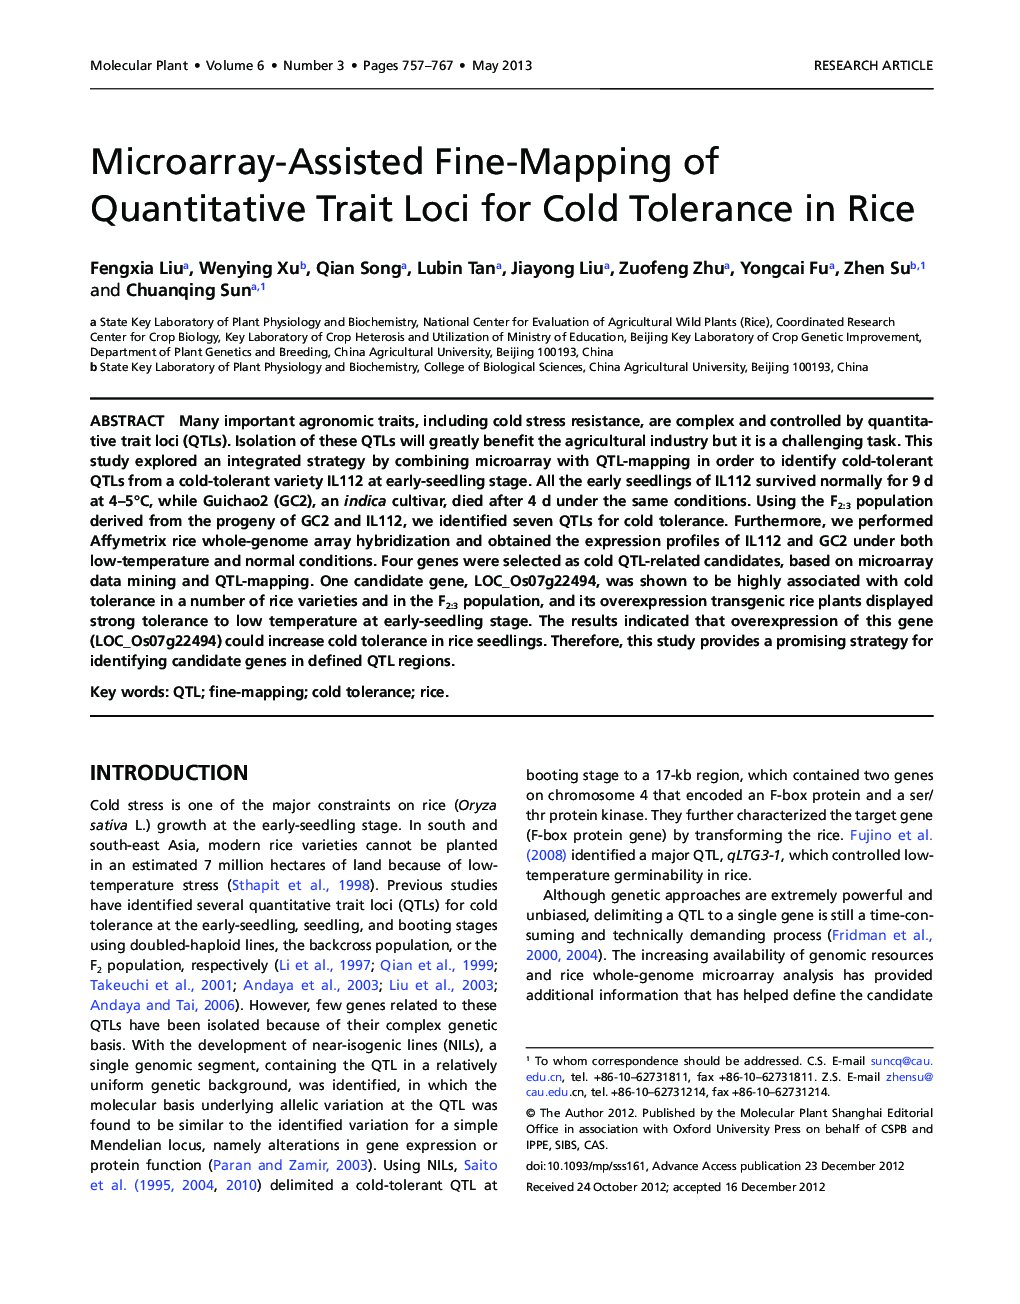 Microarray-Assisted Fine-Mapping of Quantitative Trait Loci for Cold Tolerance in Rice 